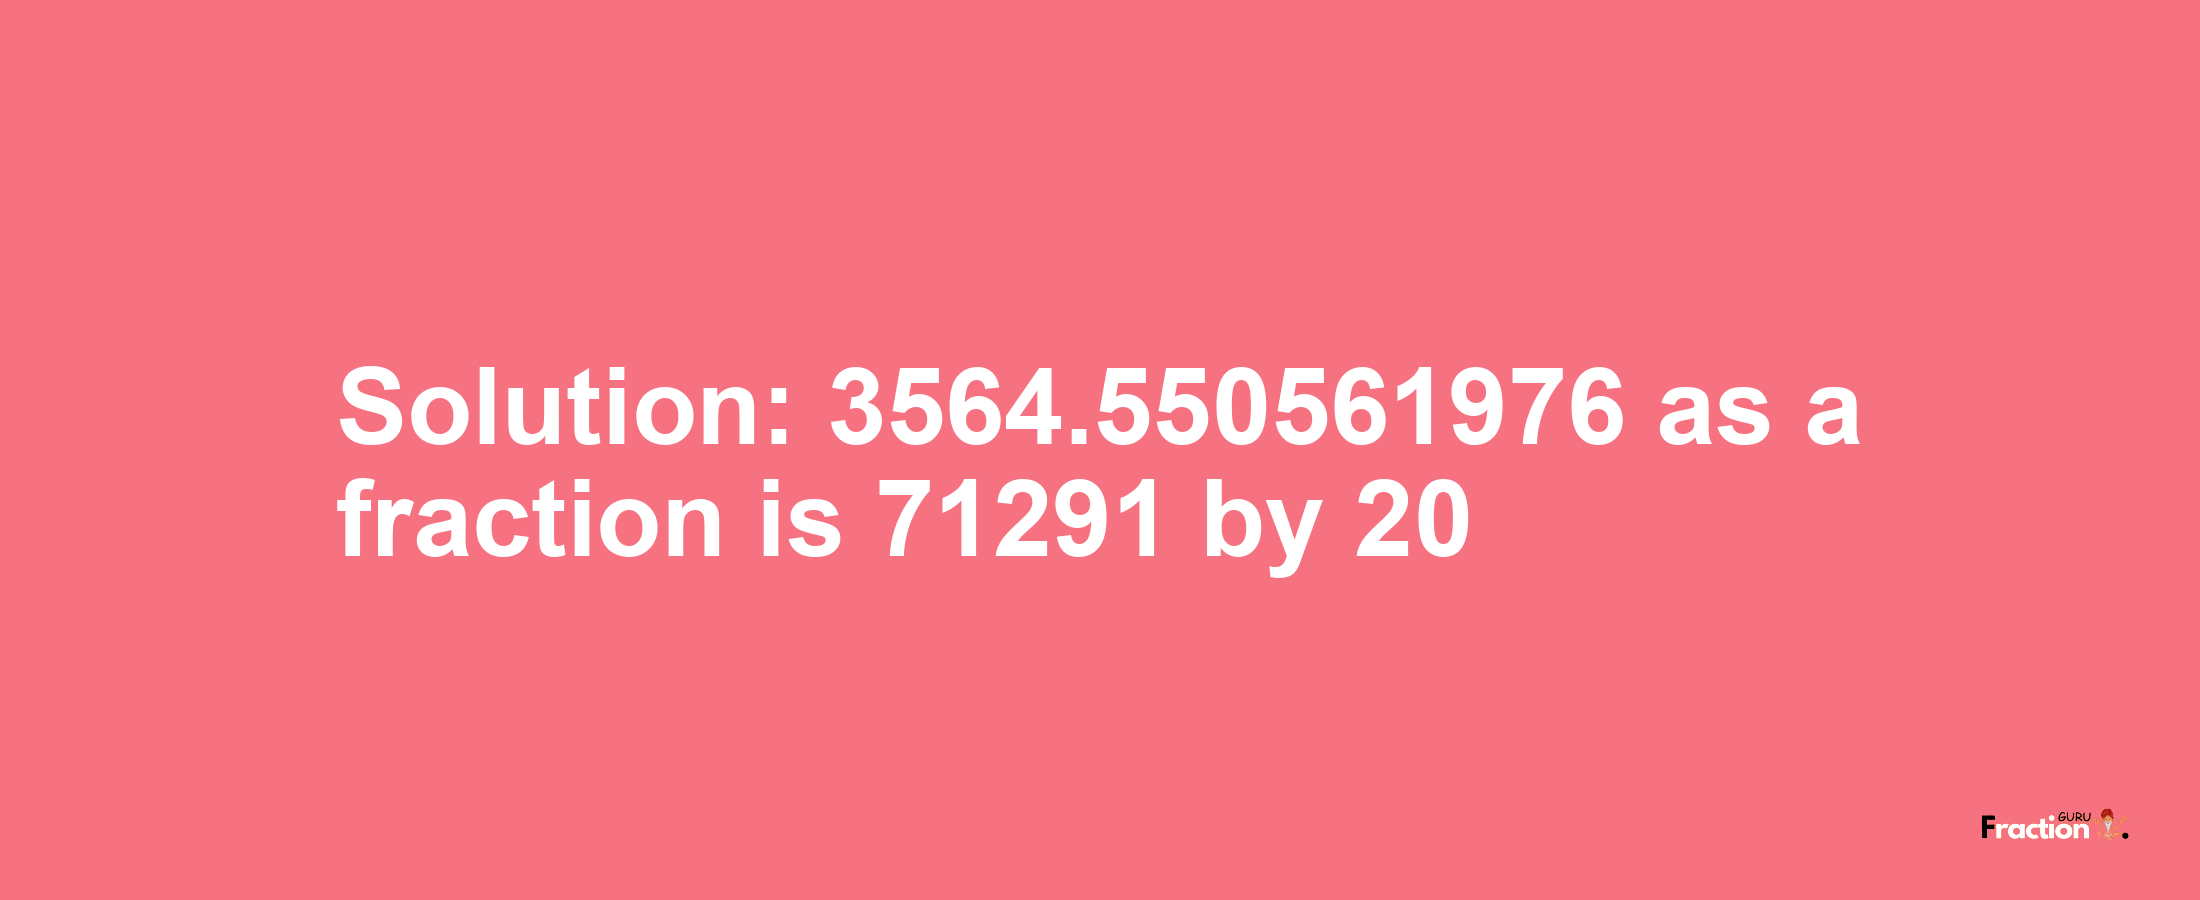 Solution:3564.550561976 as a fraction is 71291/20